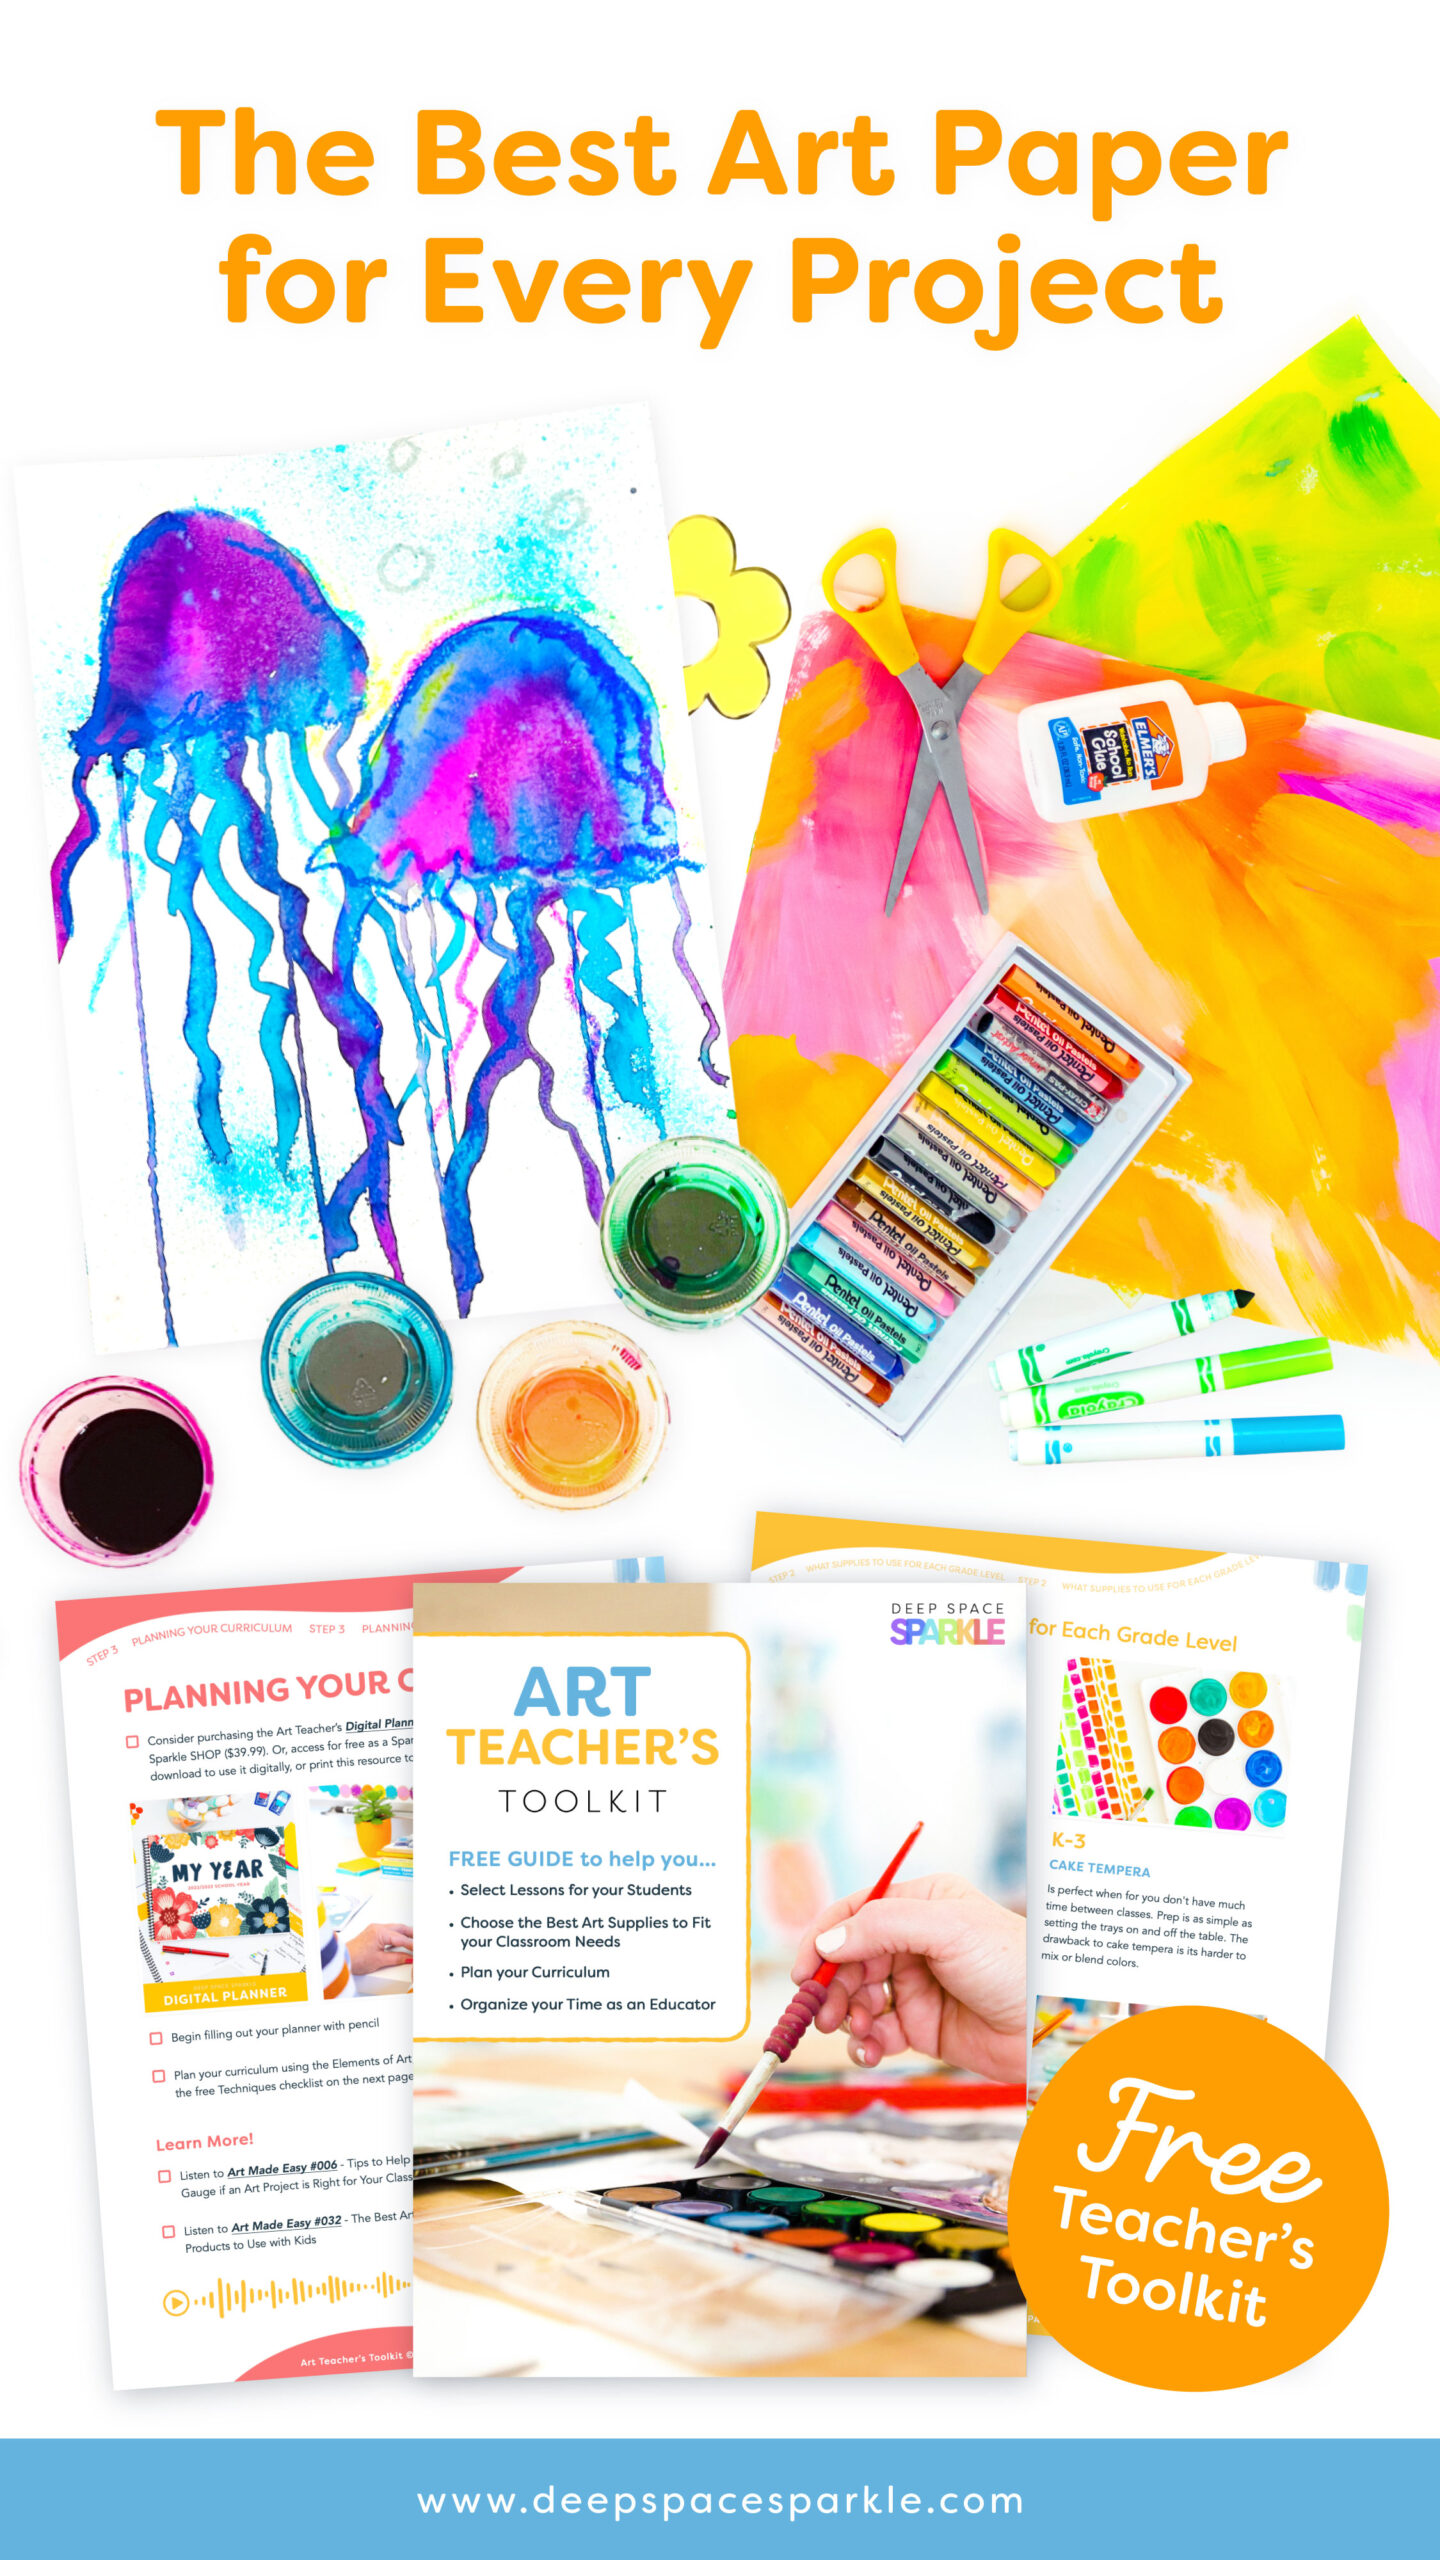 Bulk-buy Watercolor Painting Book and Drawing Art Paper for Kids Toddlers  price comparison